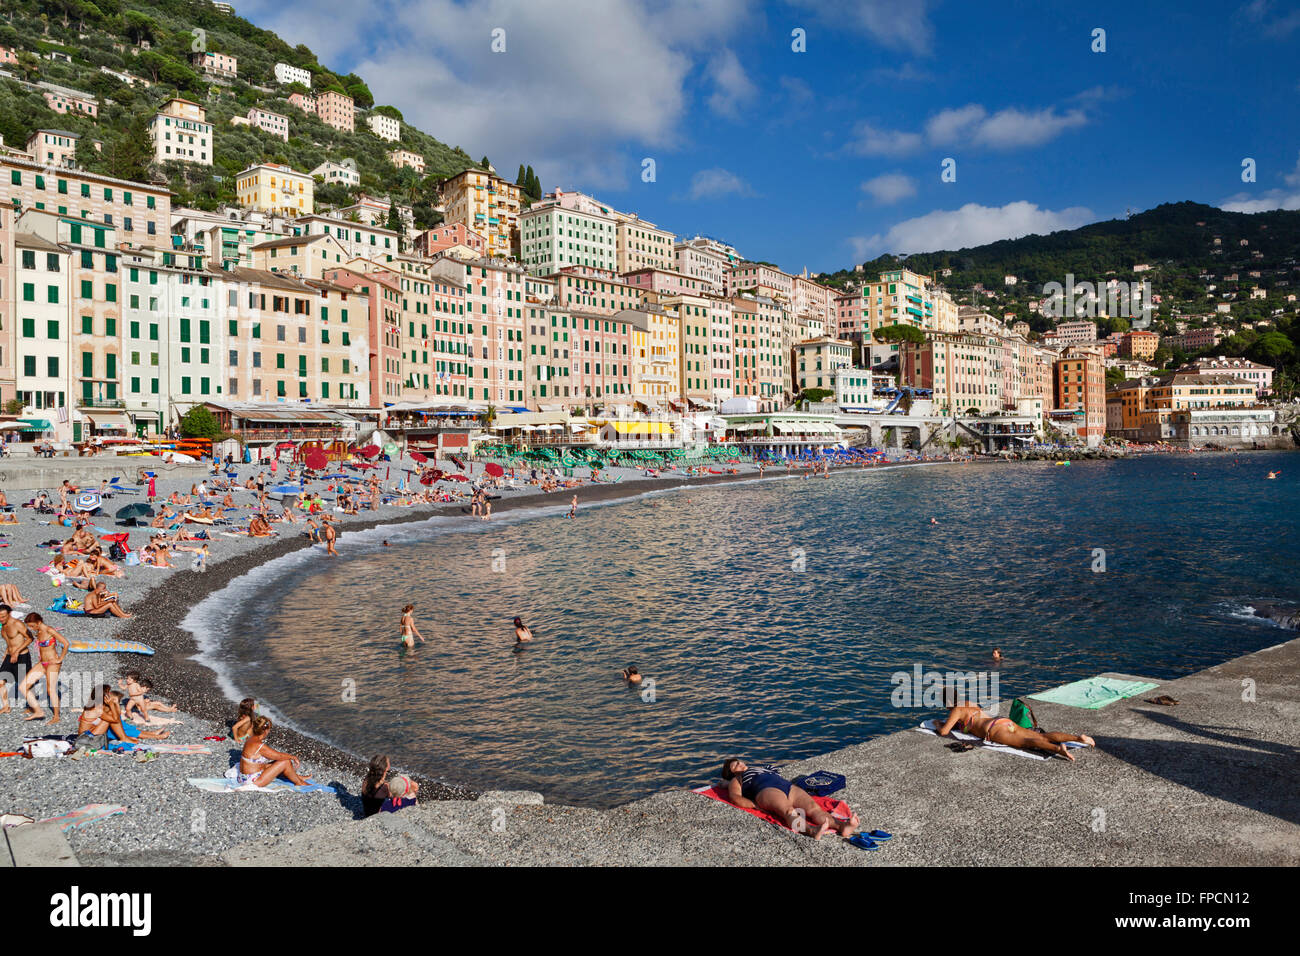 Crowds of people enjoying a day out at Camogli beach resort on the Ligurian coast. Stock Photo